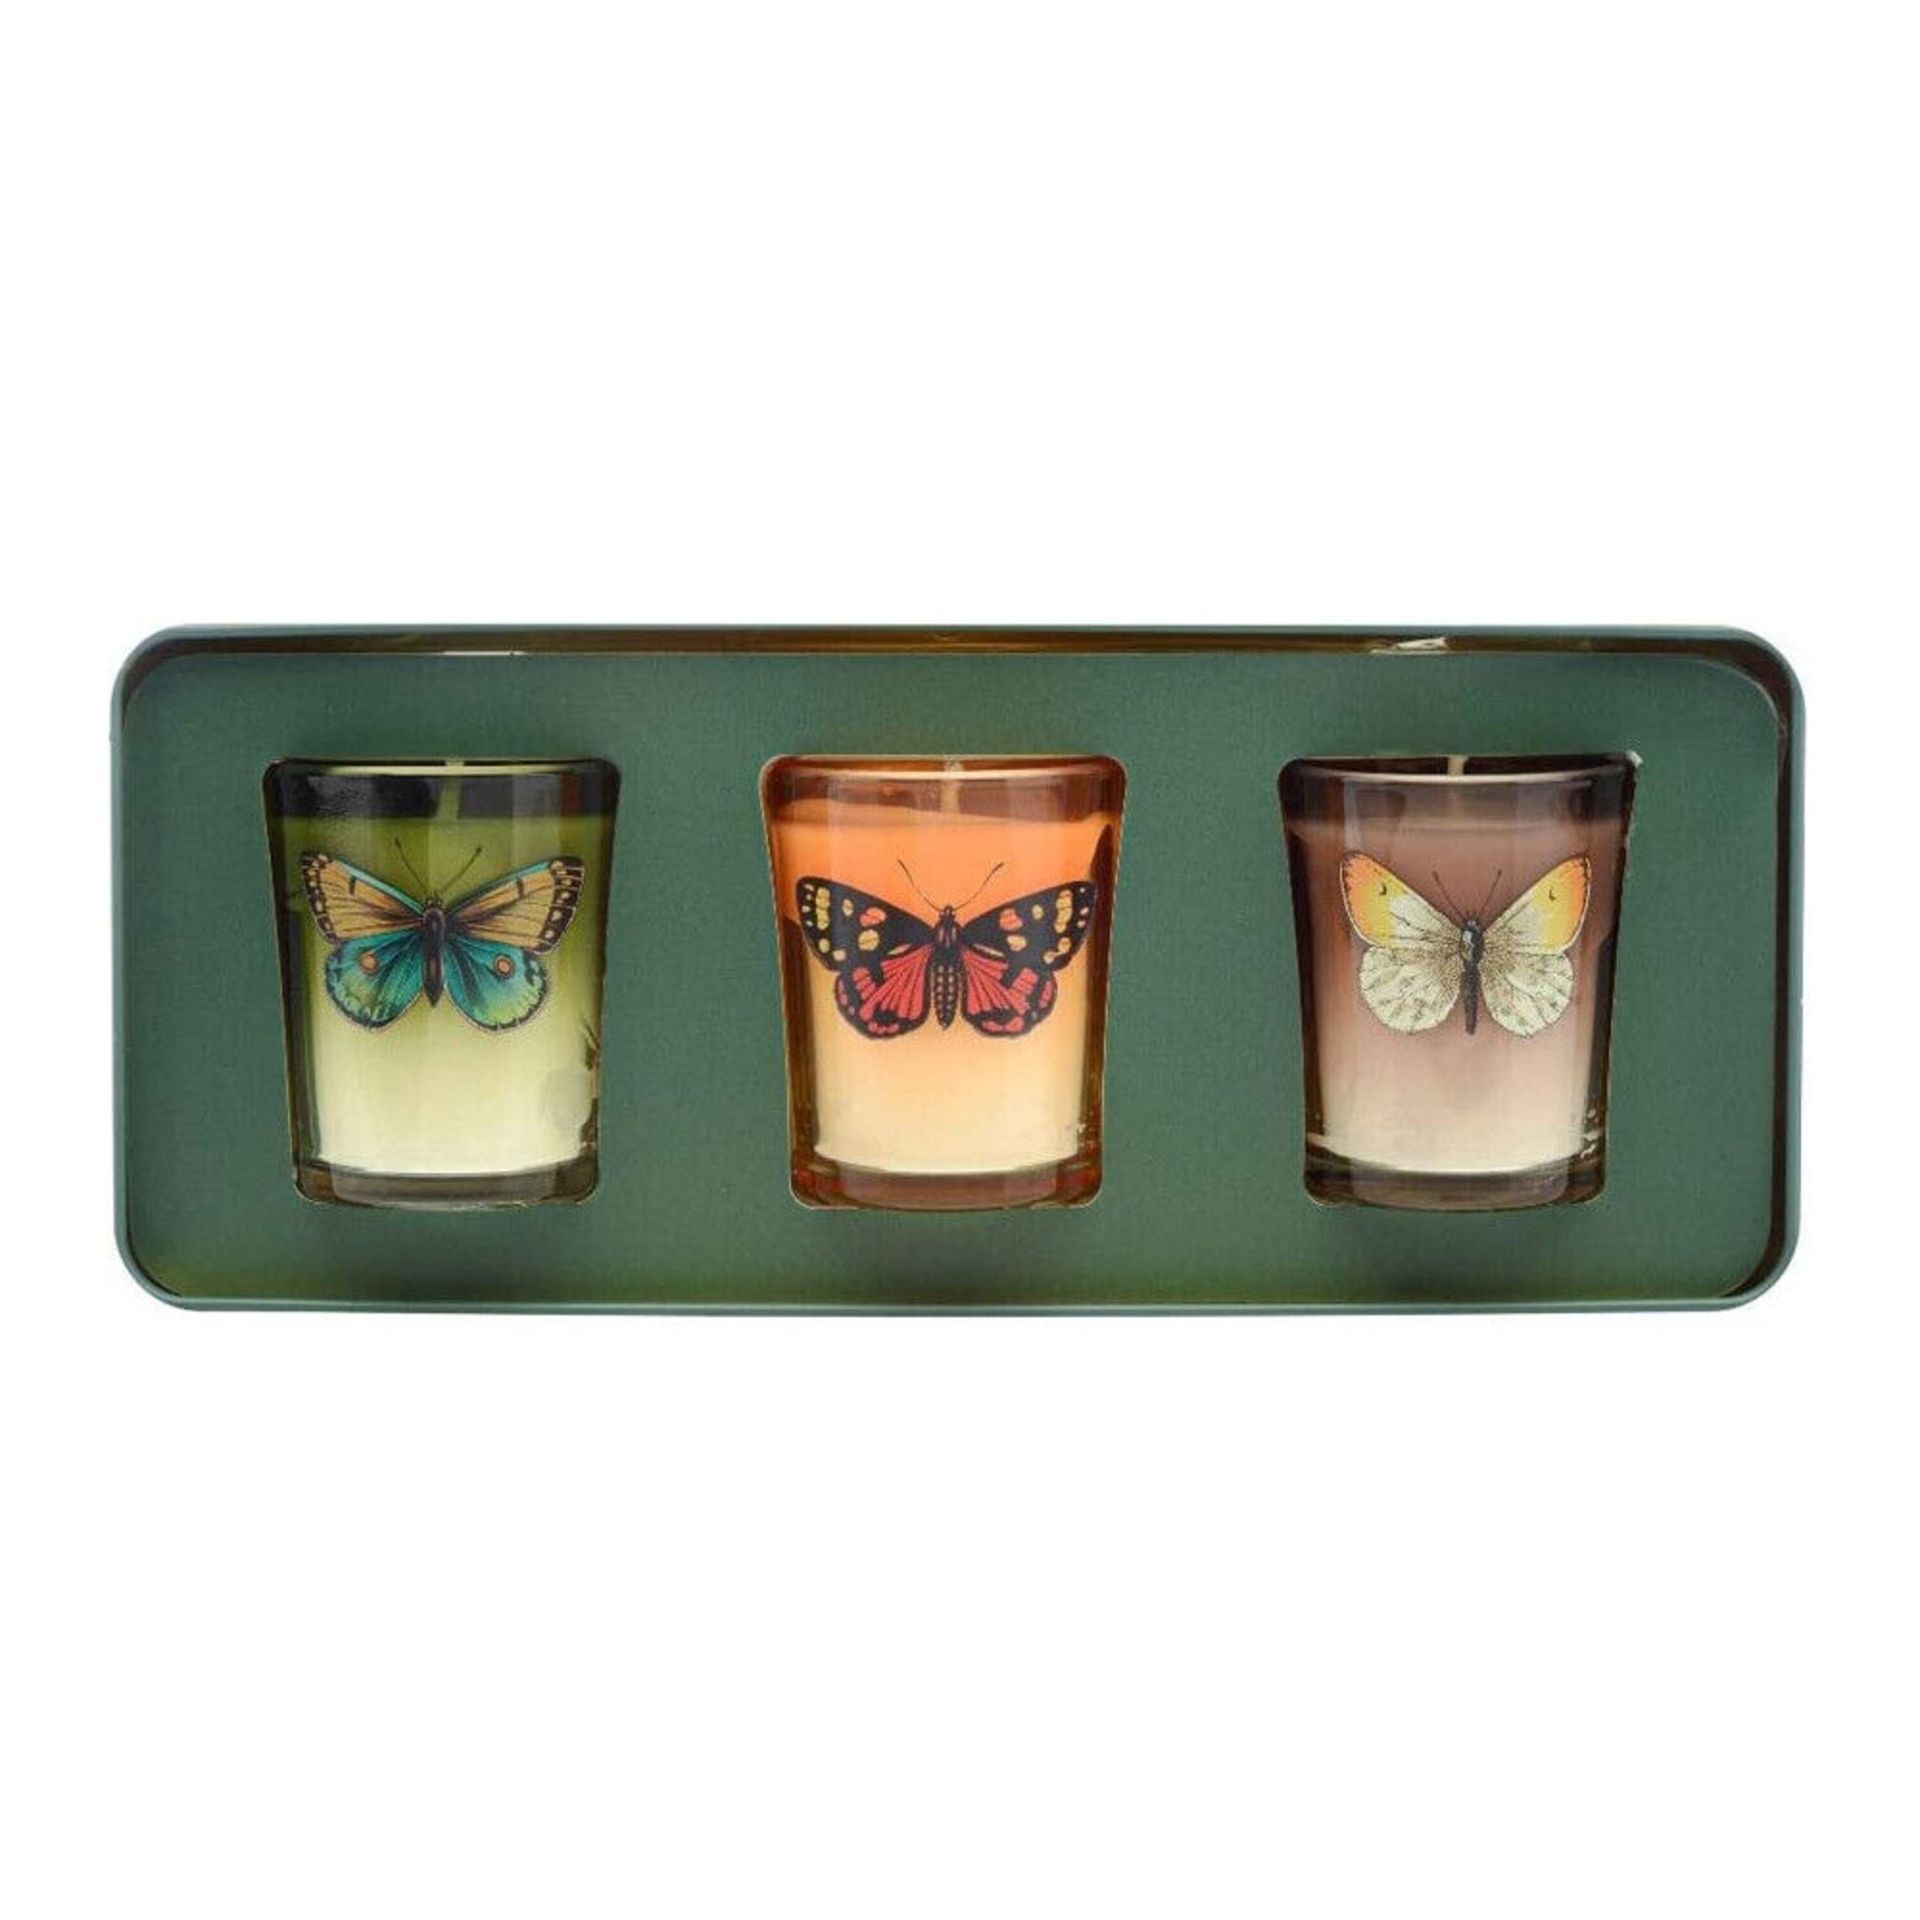 RRP £14.99 - New Harmony 3pc Butterfly Candle Gift Set - Image 2 of 2